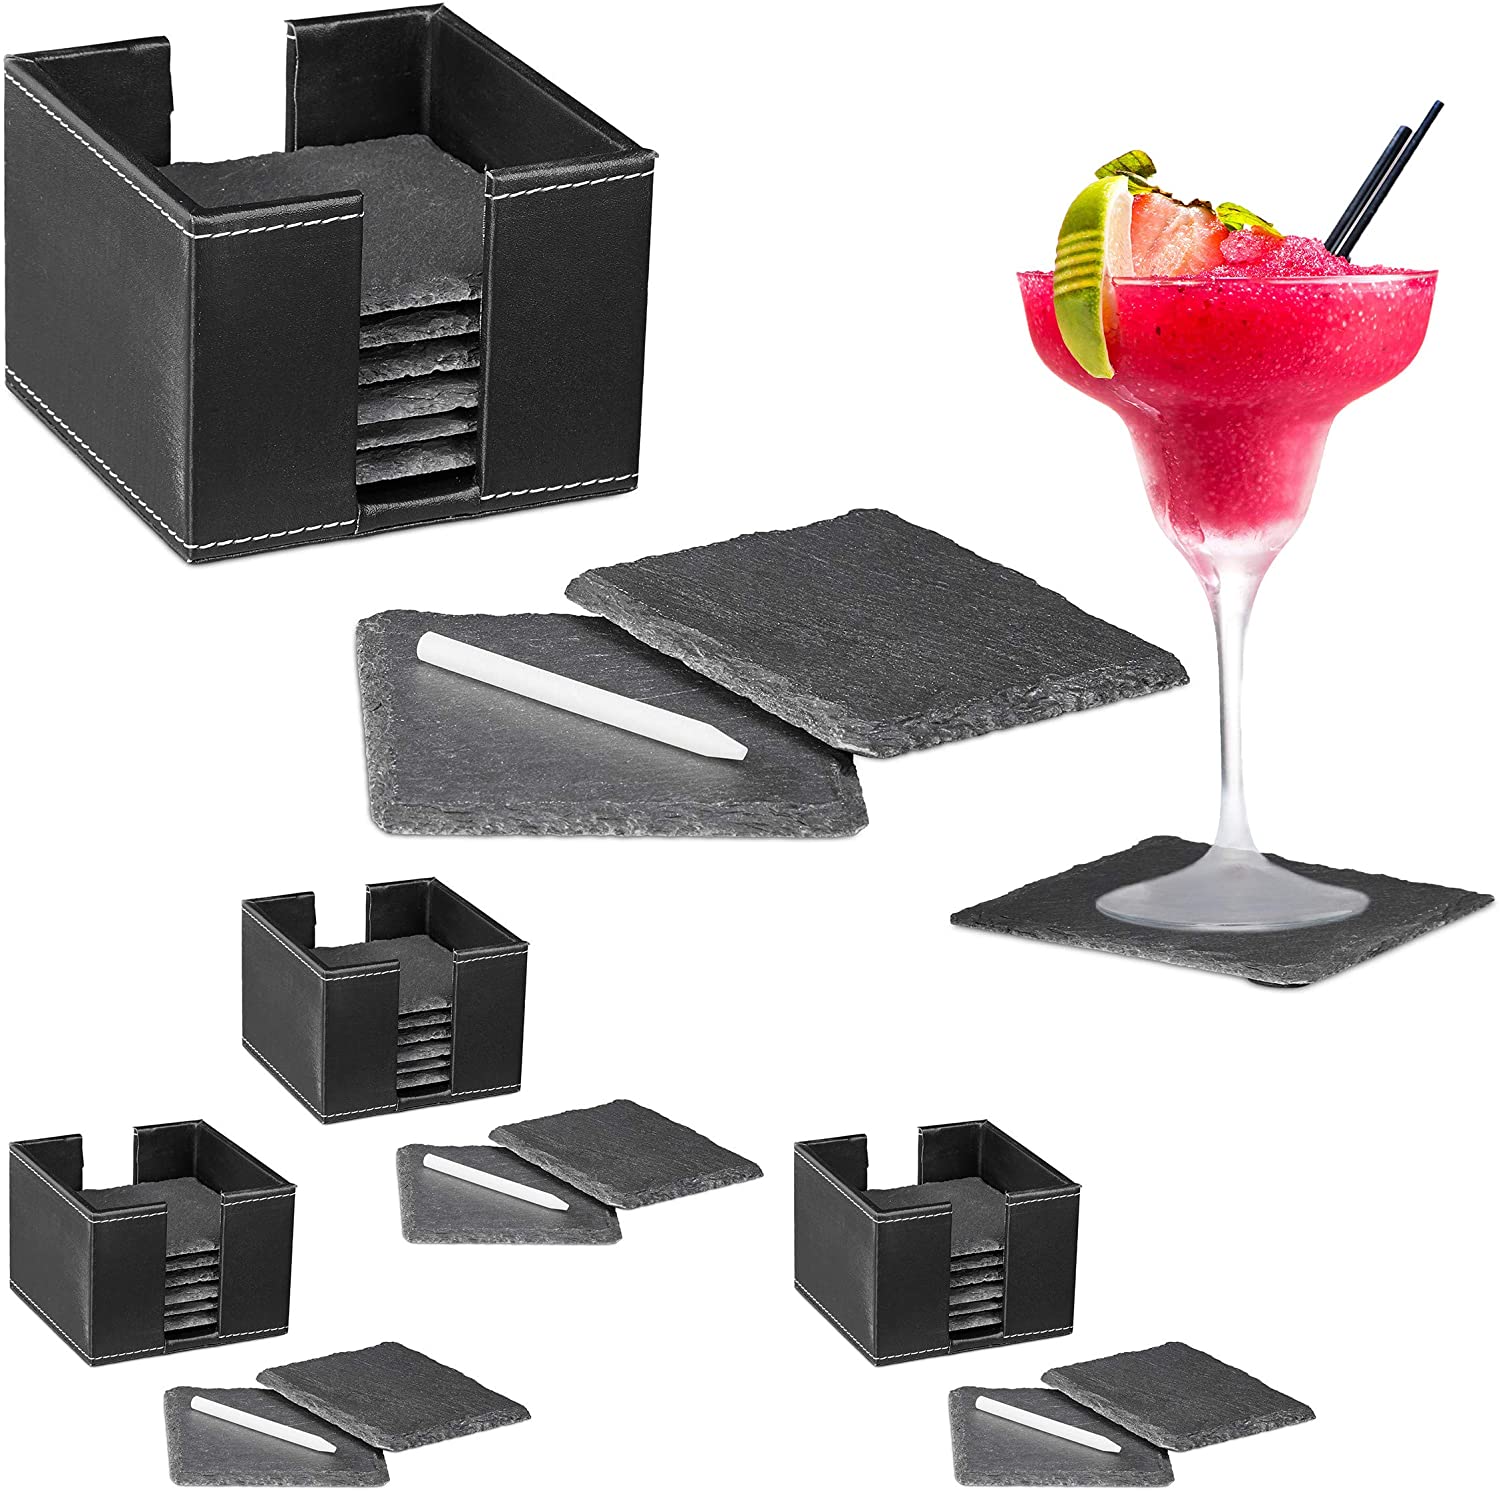 32 x Slate Coasters in a Set, Glass Coasters with 4 x Box, Chalk for Labelling, Square, 10 x 10 cm, Black